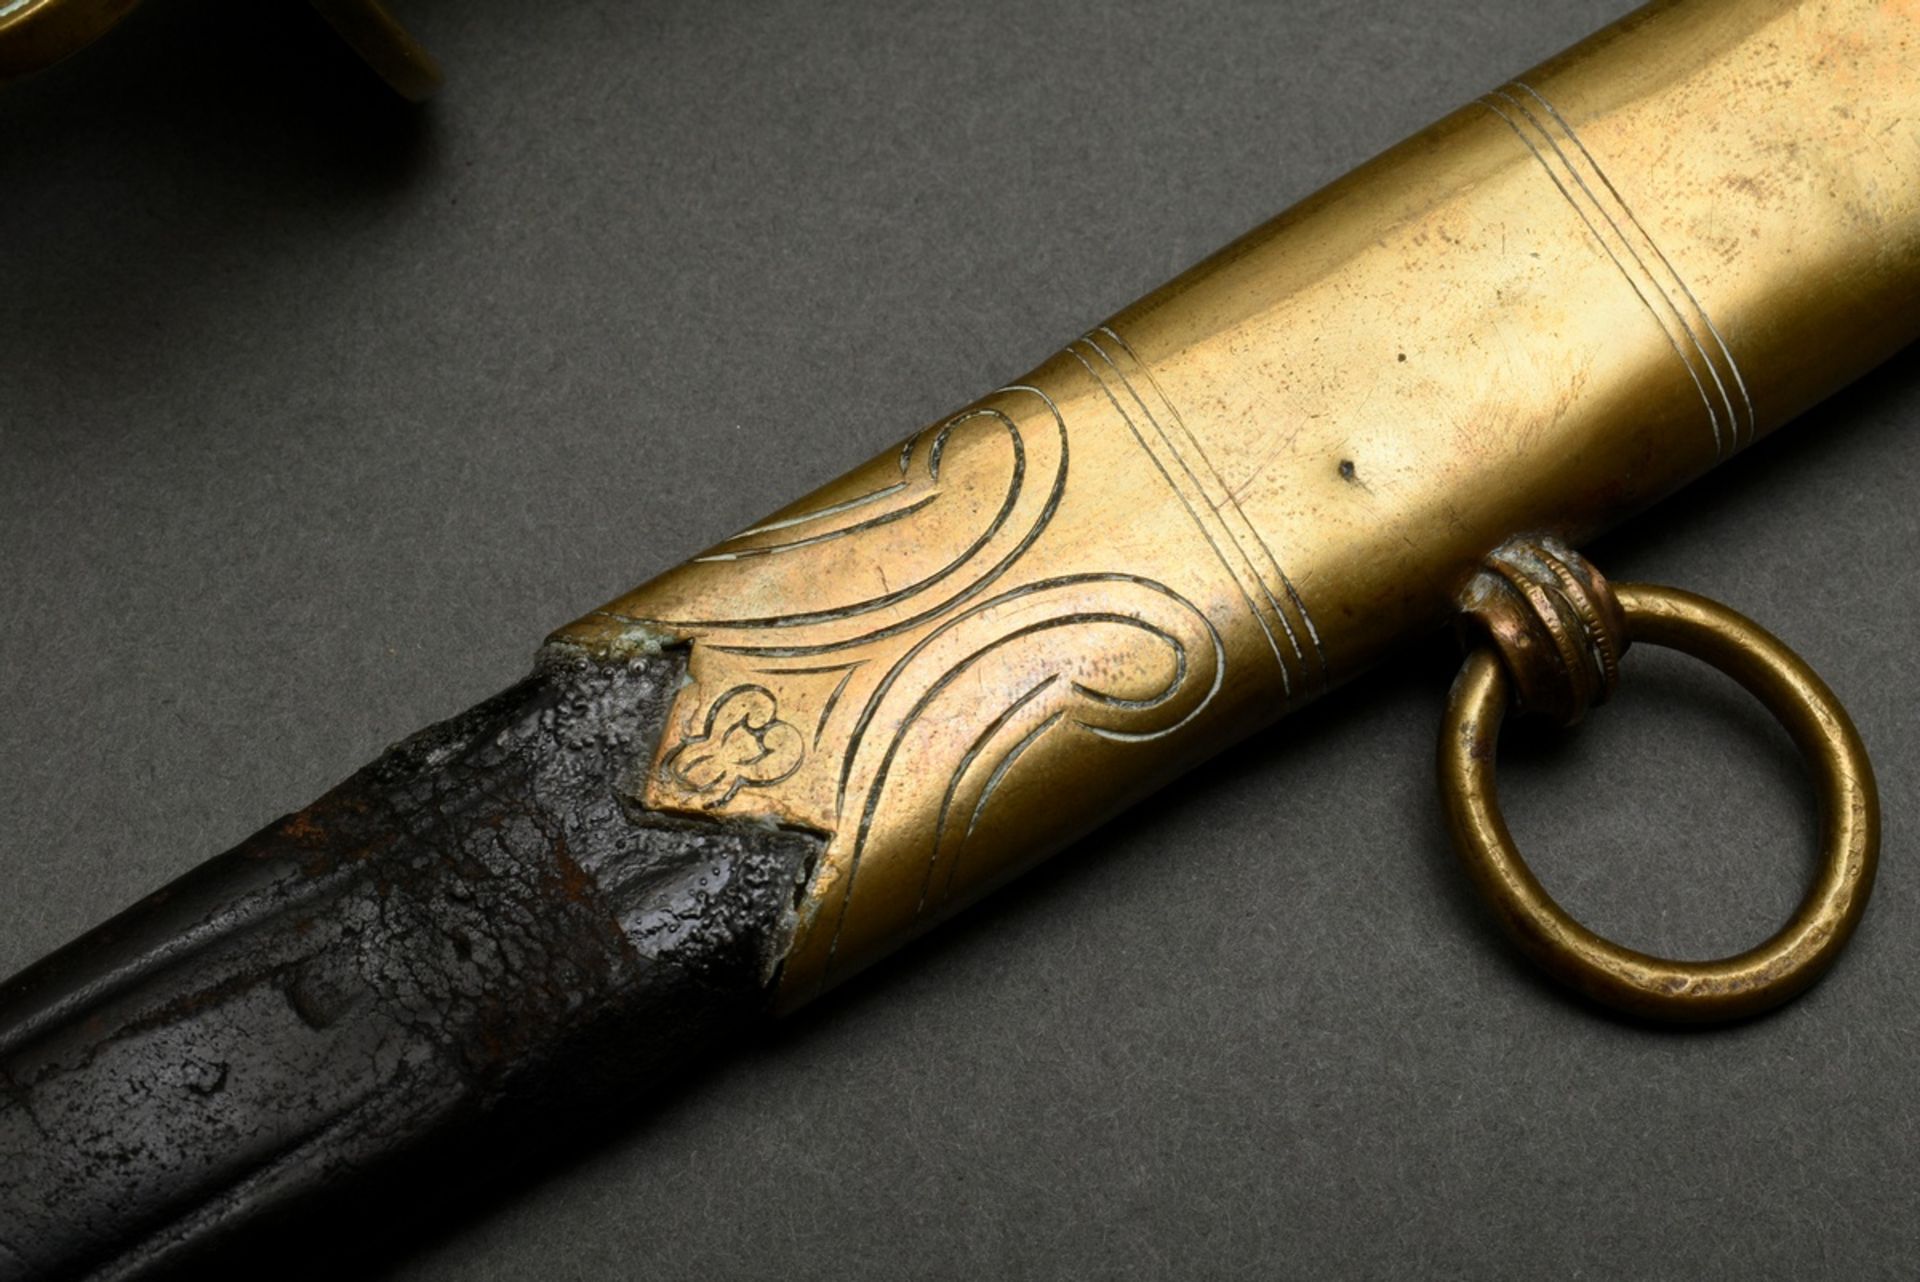 Prussian lion head sabre for the navy, bright damascus blade, maker's mark "W.K.&C." and two marks, - Image 12 of 17